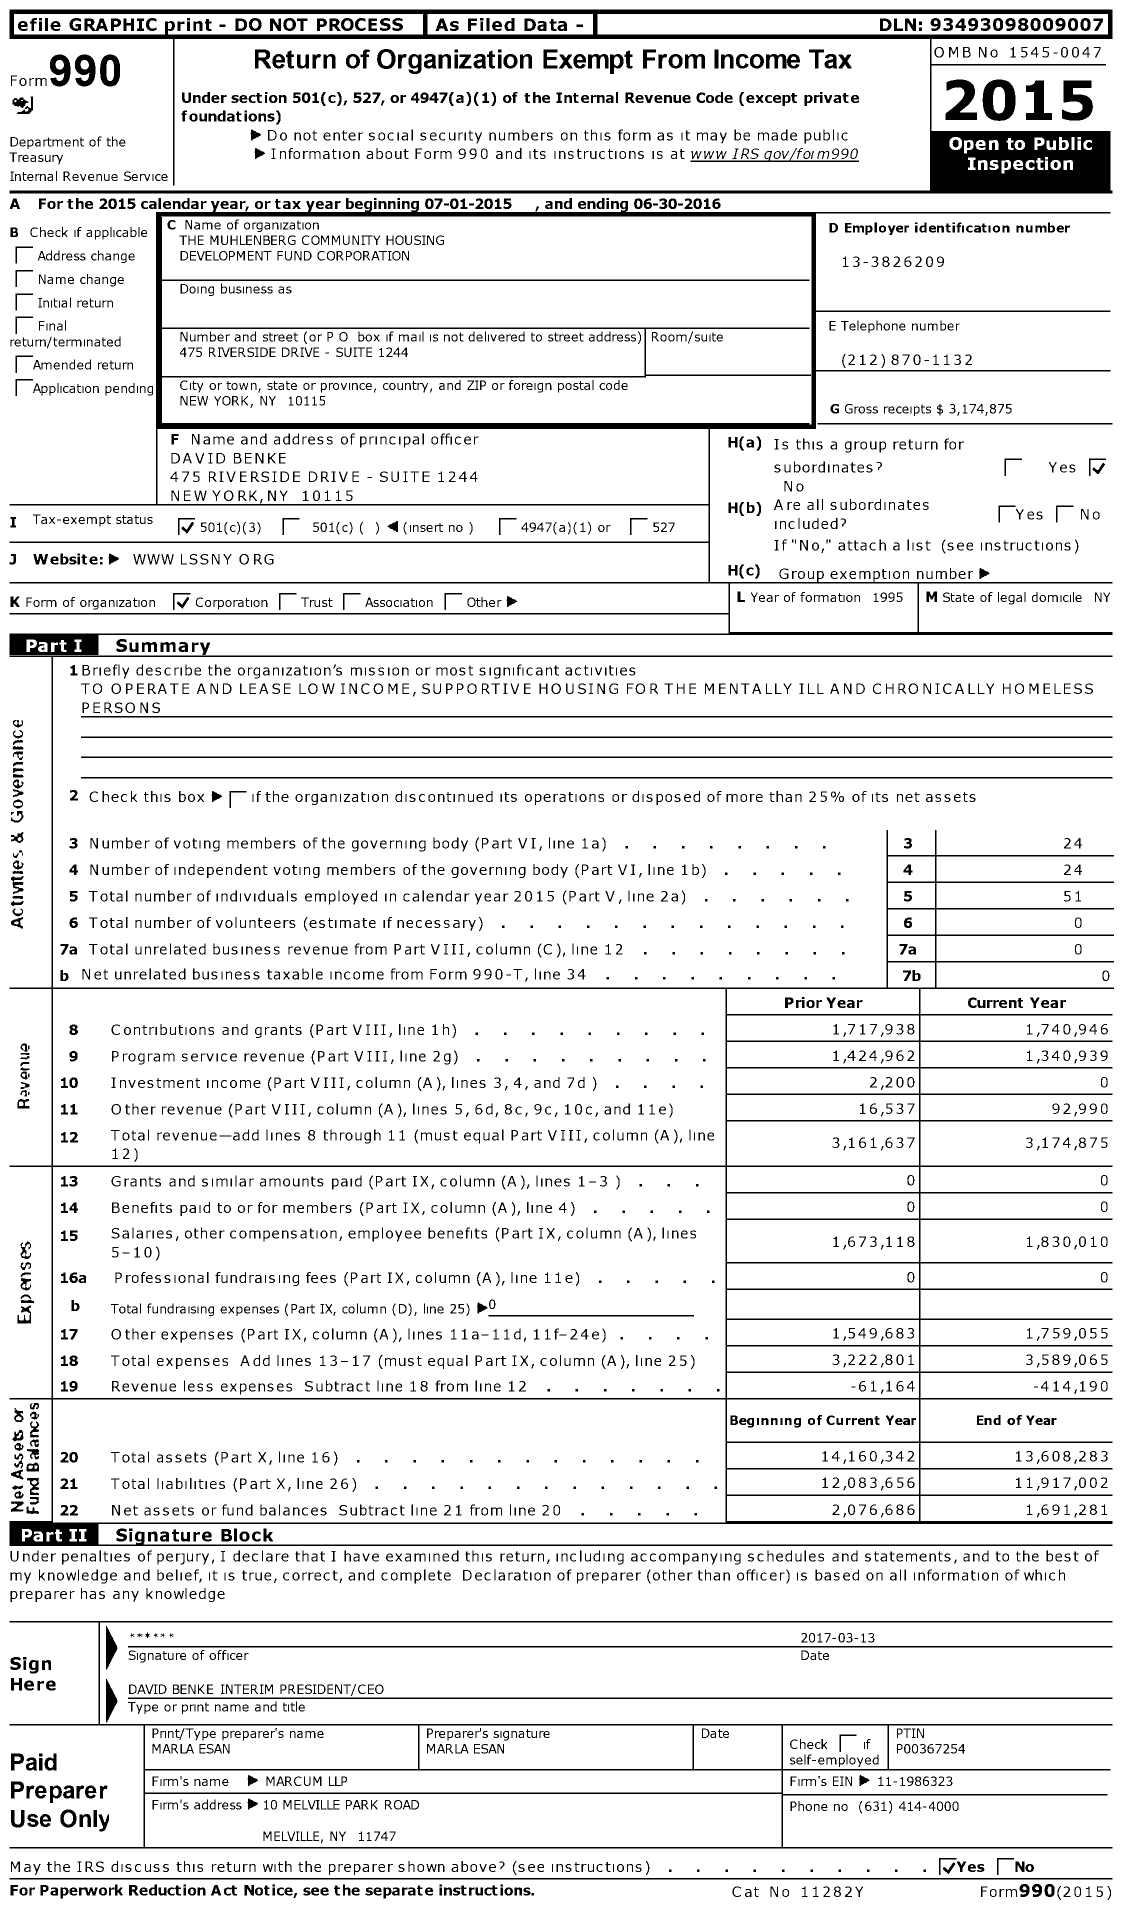 Image of first page of 2015 Form 990 for Muhlenberg Community Housing Development Fund Corporation